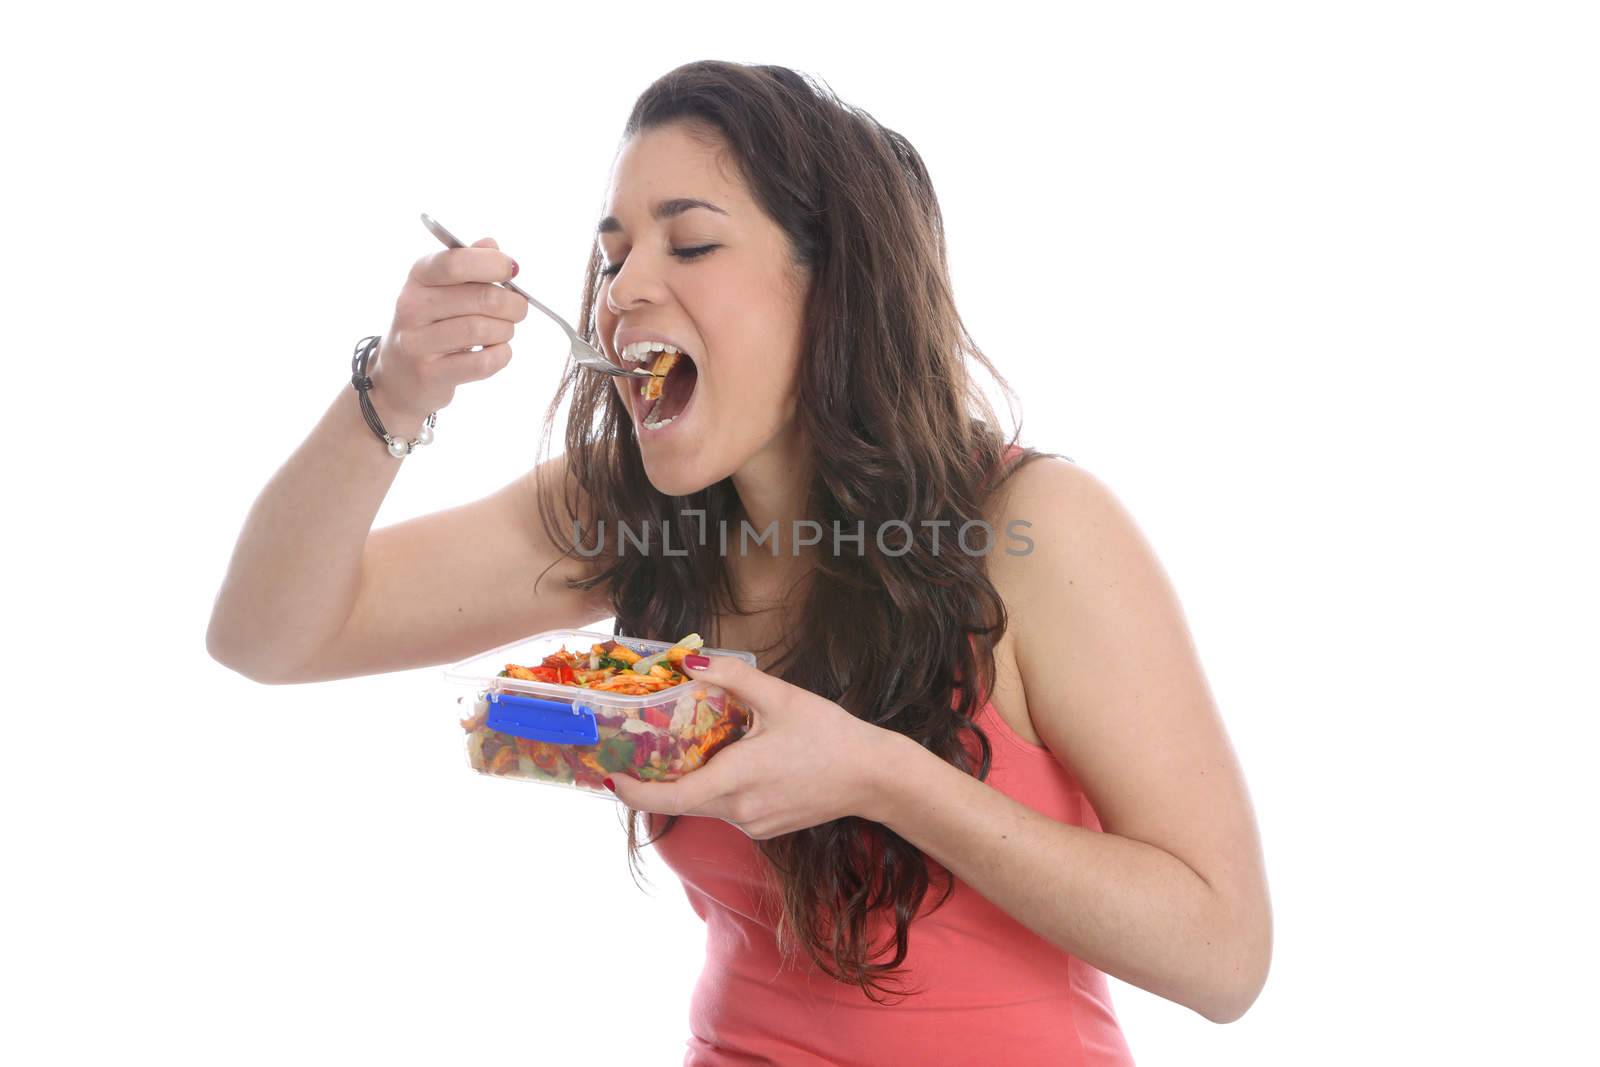 Model Released. Young Woman Eating Pasta Salad